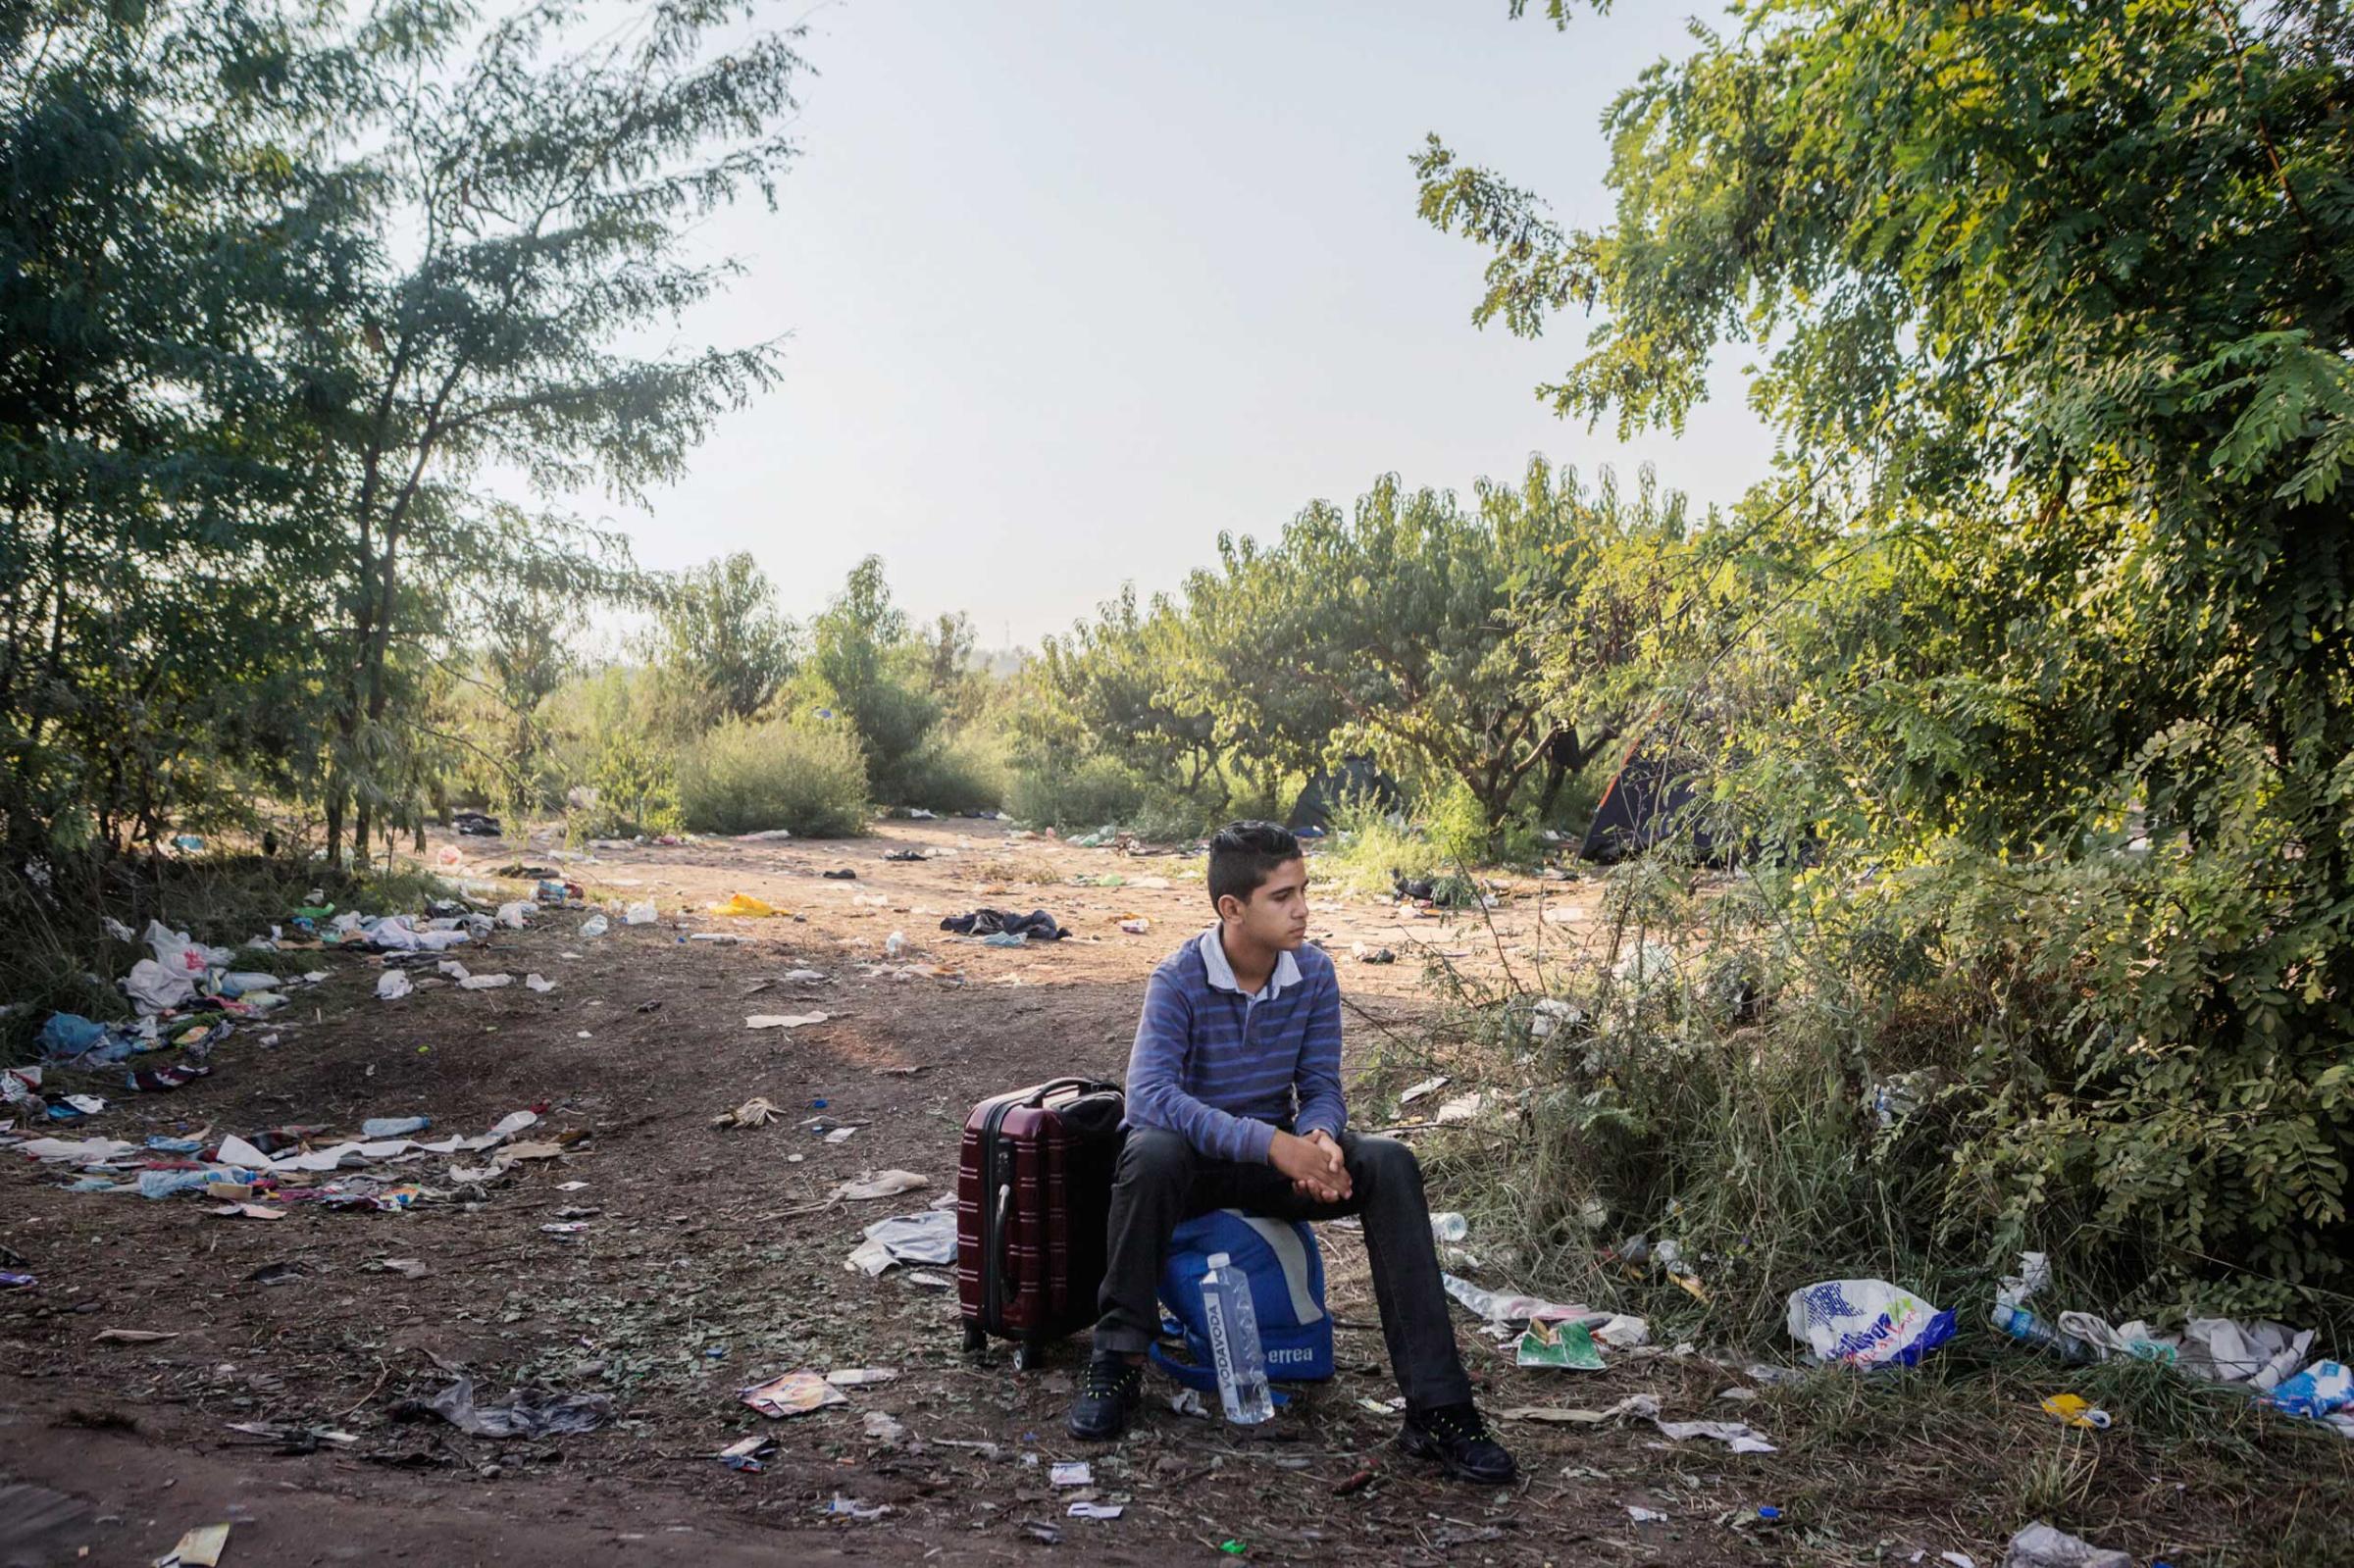 A Syrian boy at the border between Serbia and Hungary waits for his family before continuing his journey.